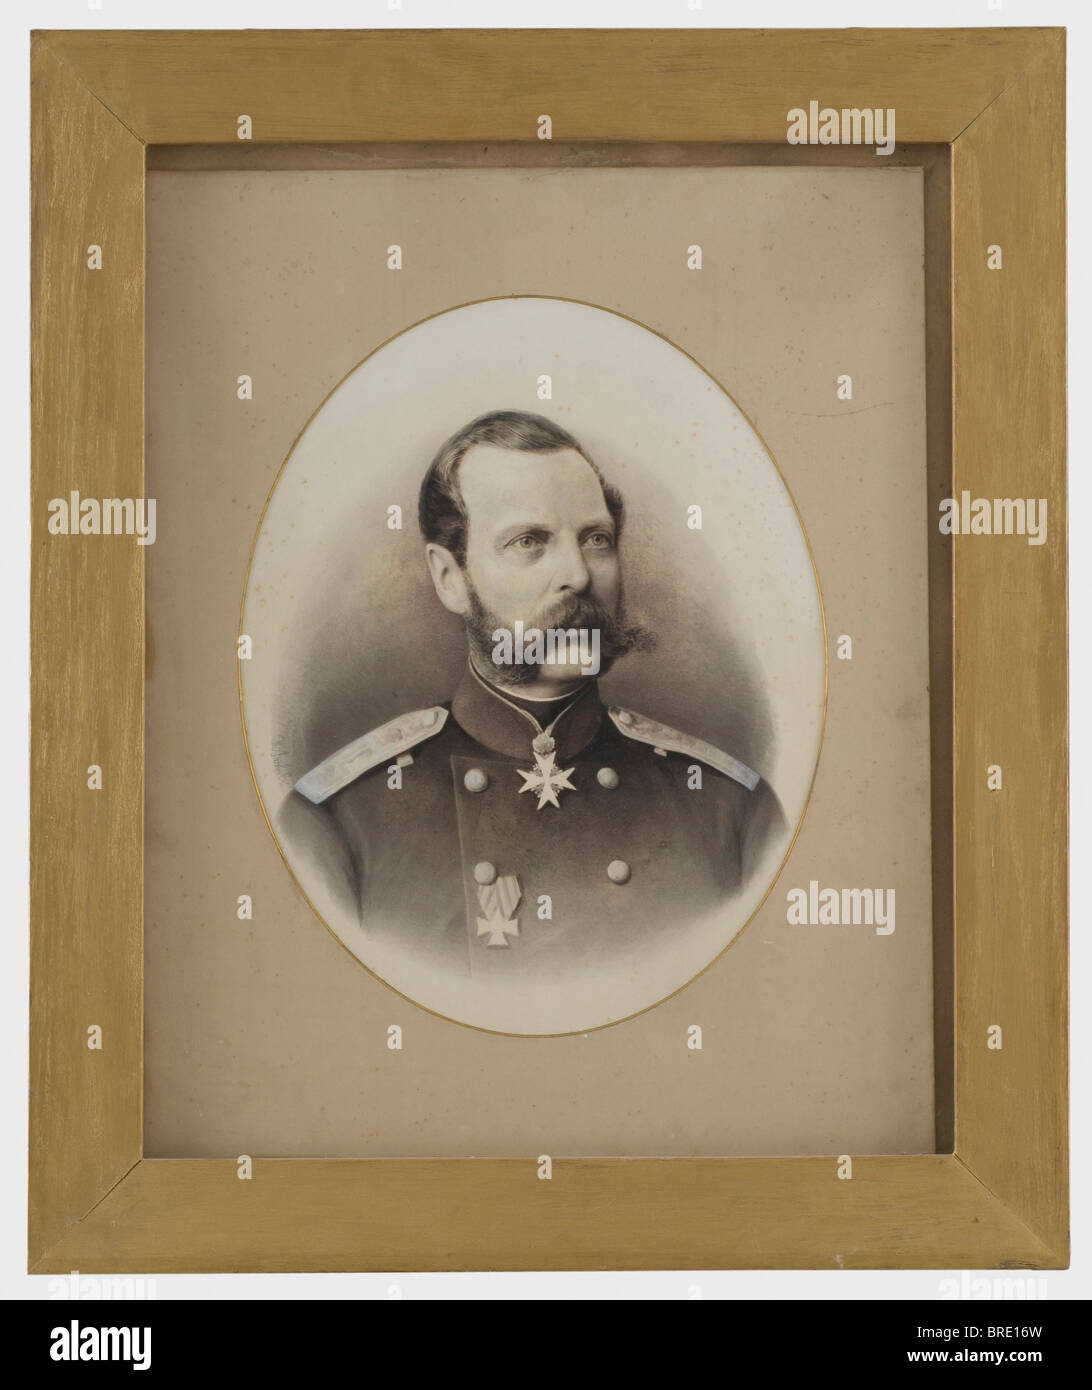 A portrait of Tsar Alexander II (1812 - 1881), partly coloured, vertically oval photograph Signed 'Ch. Jacob(?)'on the left edge. The Tsar is in uniform wearing the Cross of St. George and the Prussian Pour le mérite with oak leaves. In a wooden frame, under glass and gilt-edged passpartout. Dimensions of the photograph 53 x 42 cm, of the frame 89 x 74 cm. Provenance: Grand Duchess Olga Nikolaevna Romanova (1822 - 1892). people, 19th century, object, objects, stills, clipping, clippings, cut out, cut-out, cut-outs, photograph, photo, photographs, photography, p, Stock Photo